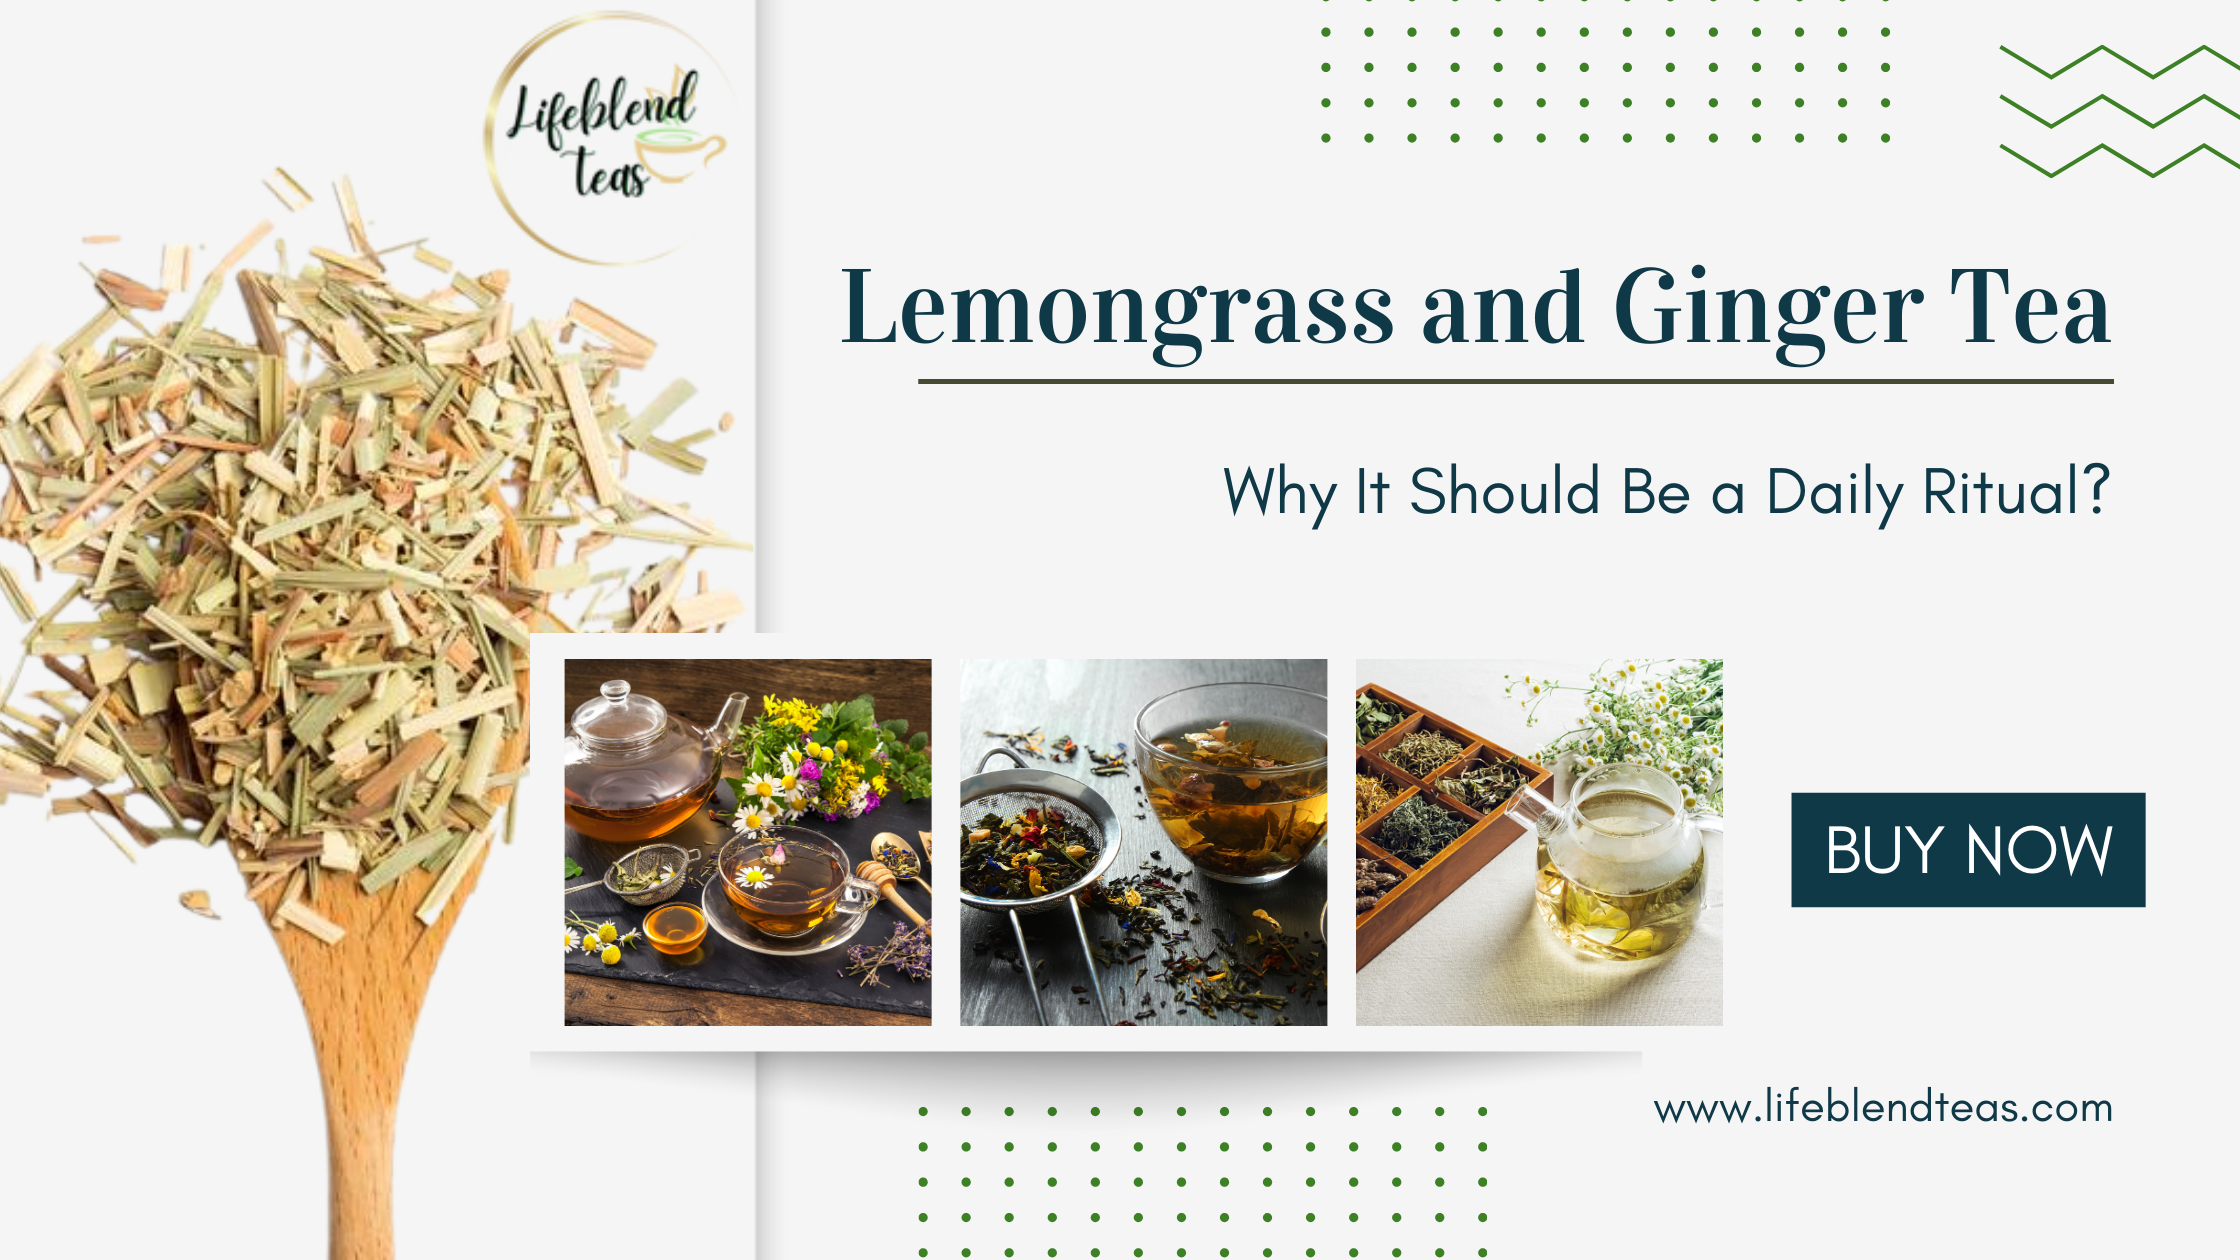 Why Lemongrass and Ginger Tea Should Be a Daily Ritual?